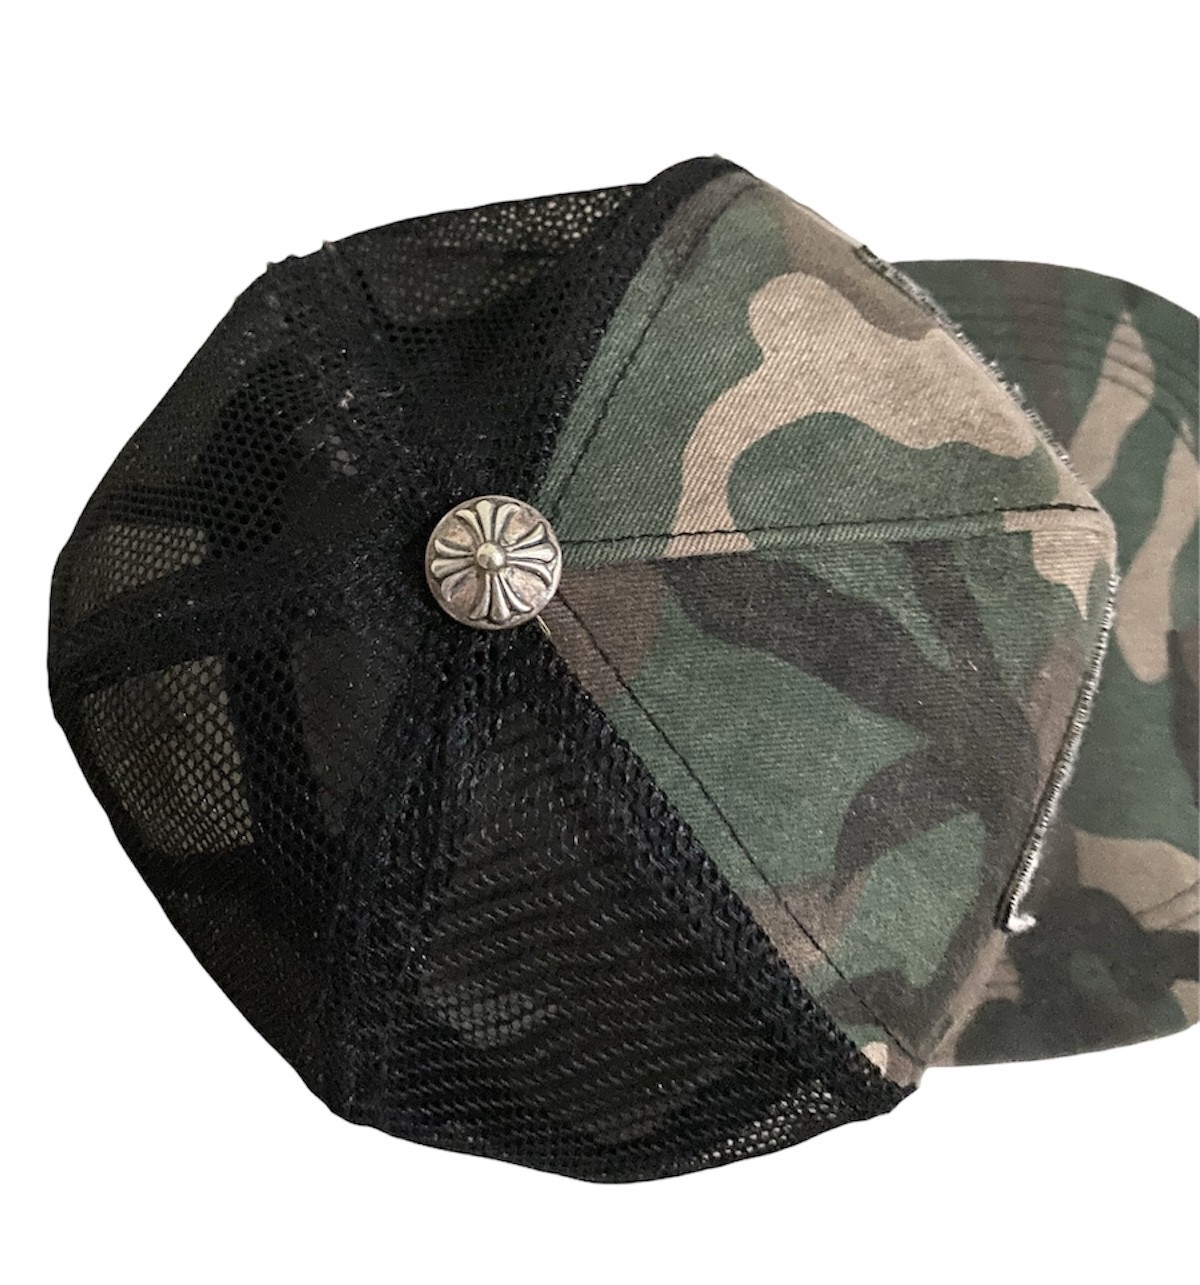 CHROME HEARTS CAMOUFLAGE TRUCKER - 5